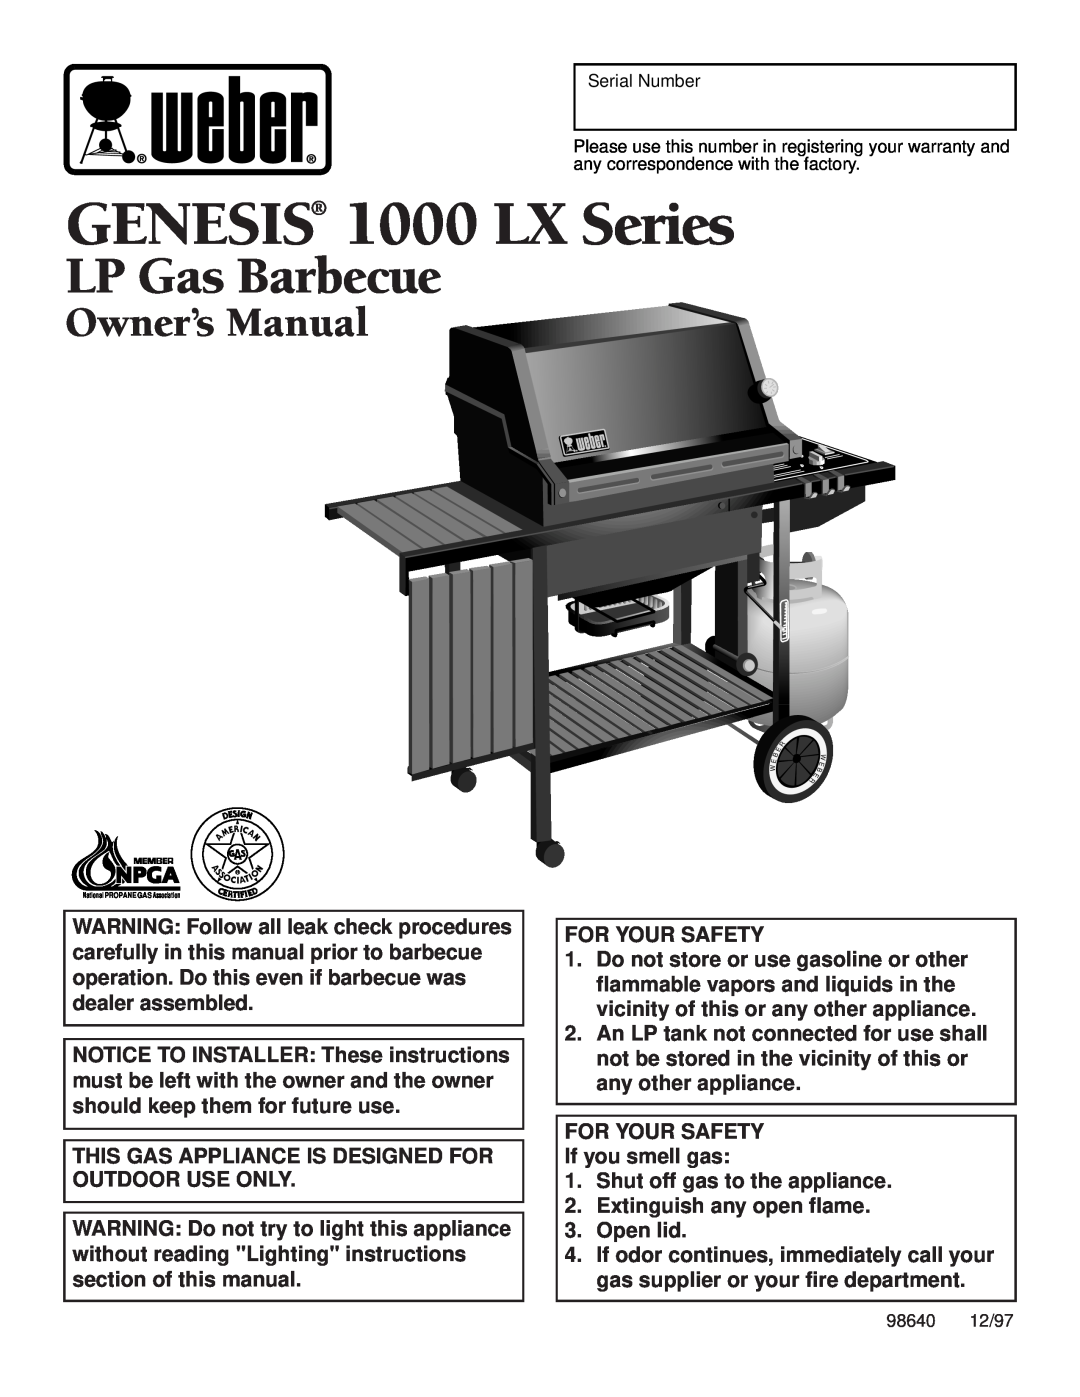 Weber owner manual LP Gas Barbecue, GENESIS 1000 LX Series, For Your Safety, FOR YOUR SAFETY If you smell gas 